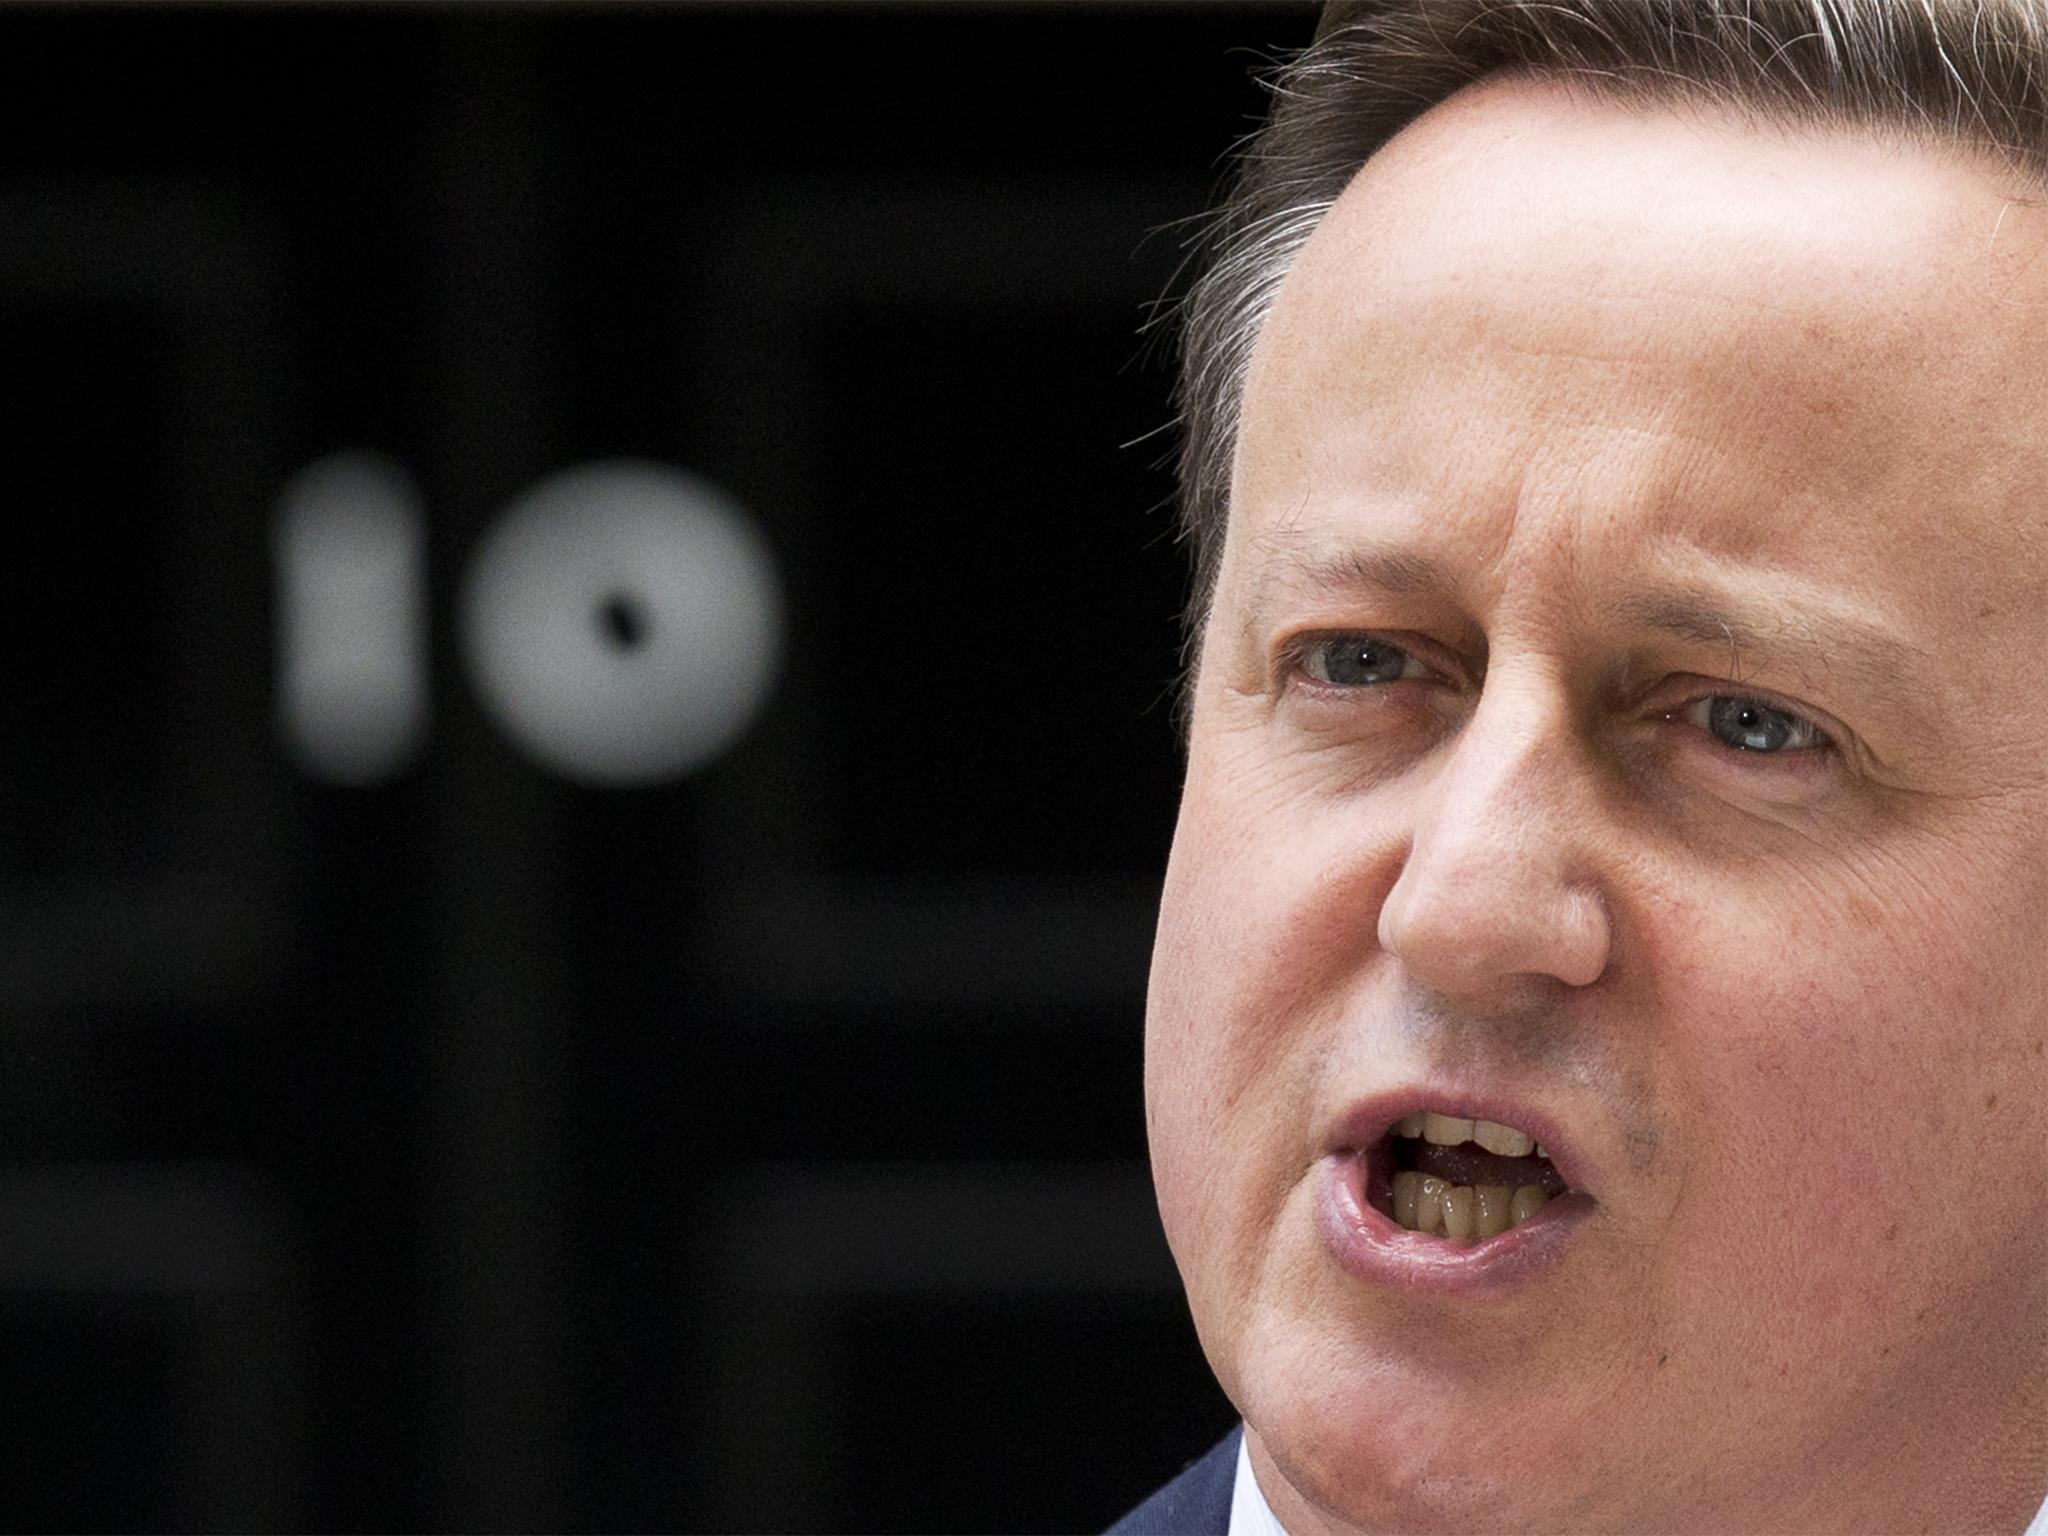 The president of the EU has just dealt a serious blow to David Cameron